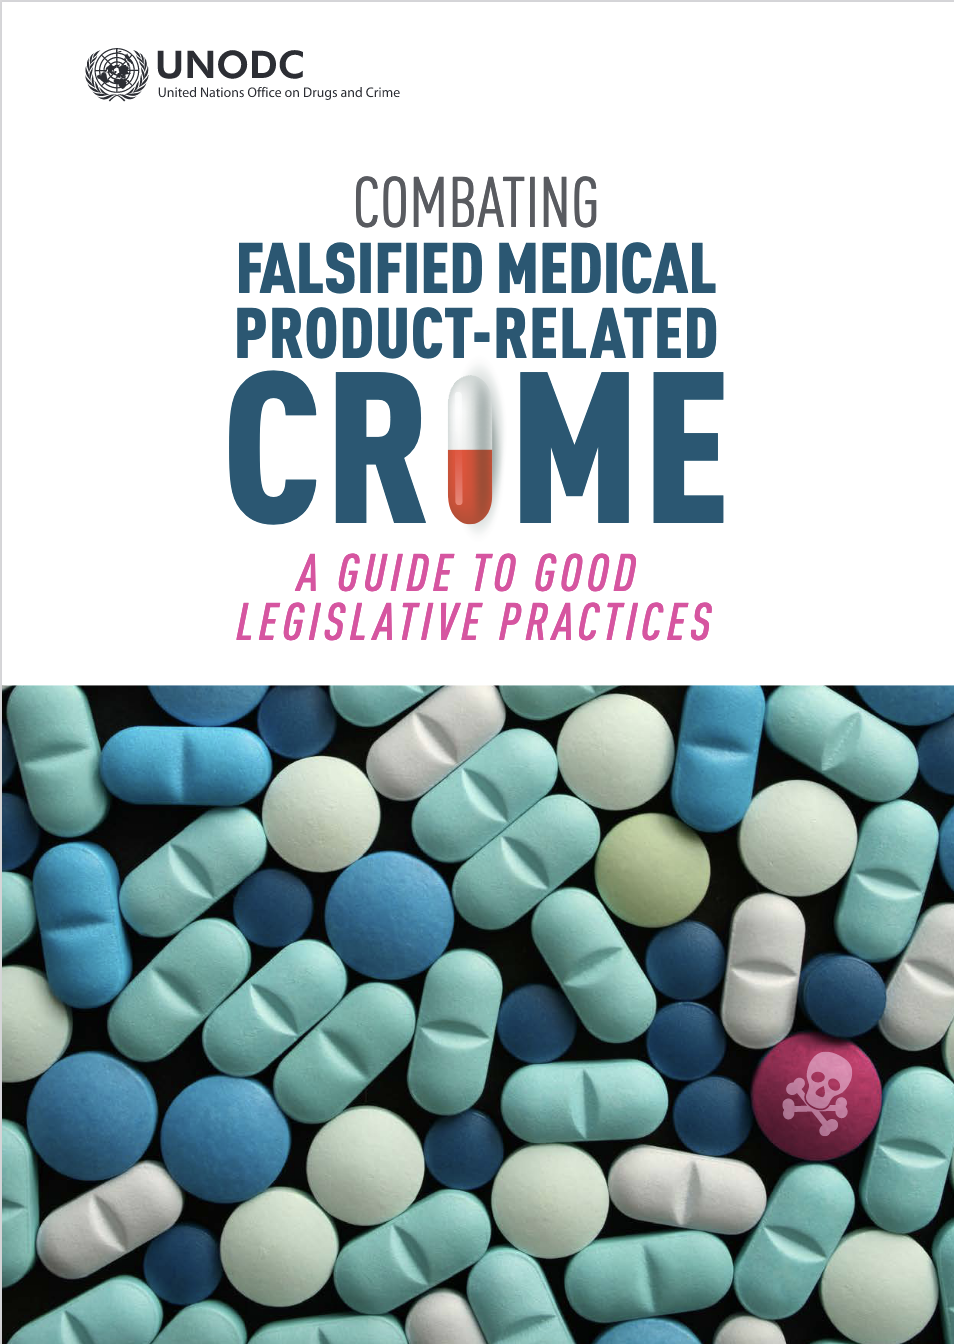 <div> </div>
<div style="text-align: center;">Combating Falsified Medical Product-Related Crime: A Guide to Good Legislative Practices</div>
<div style="text-align: center;">(<a href="https://www.unodc.org/documents/treaties/publications/19-00741_Guide_Falsified_Medical_Products_ebook.pdf">E</a> - <a href="https://www.unodc.org/documents/treaties/publications/19-00742_F_ebook.pdf">F</a>)</div>